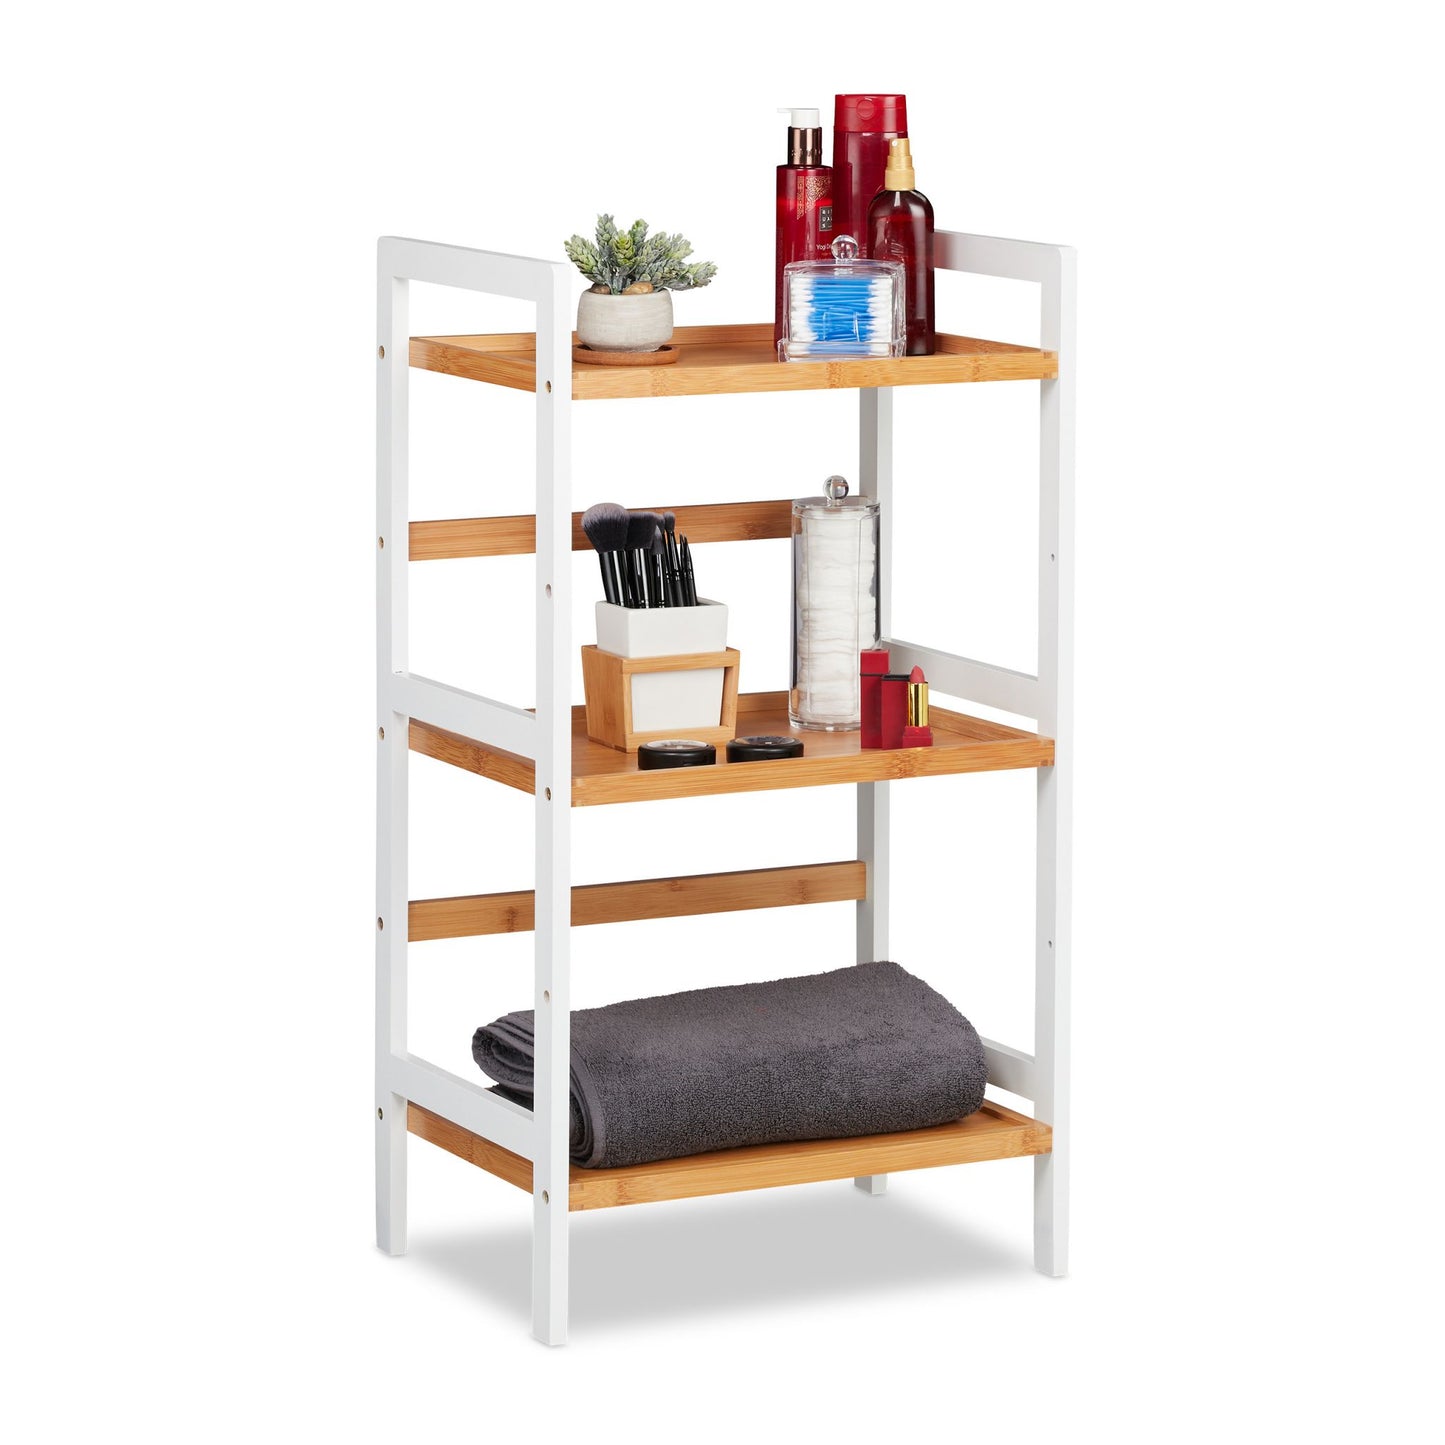 RelaxDays  Bathroom Shelving Unit White/Natural Bamboo Bathrooms